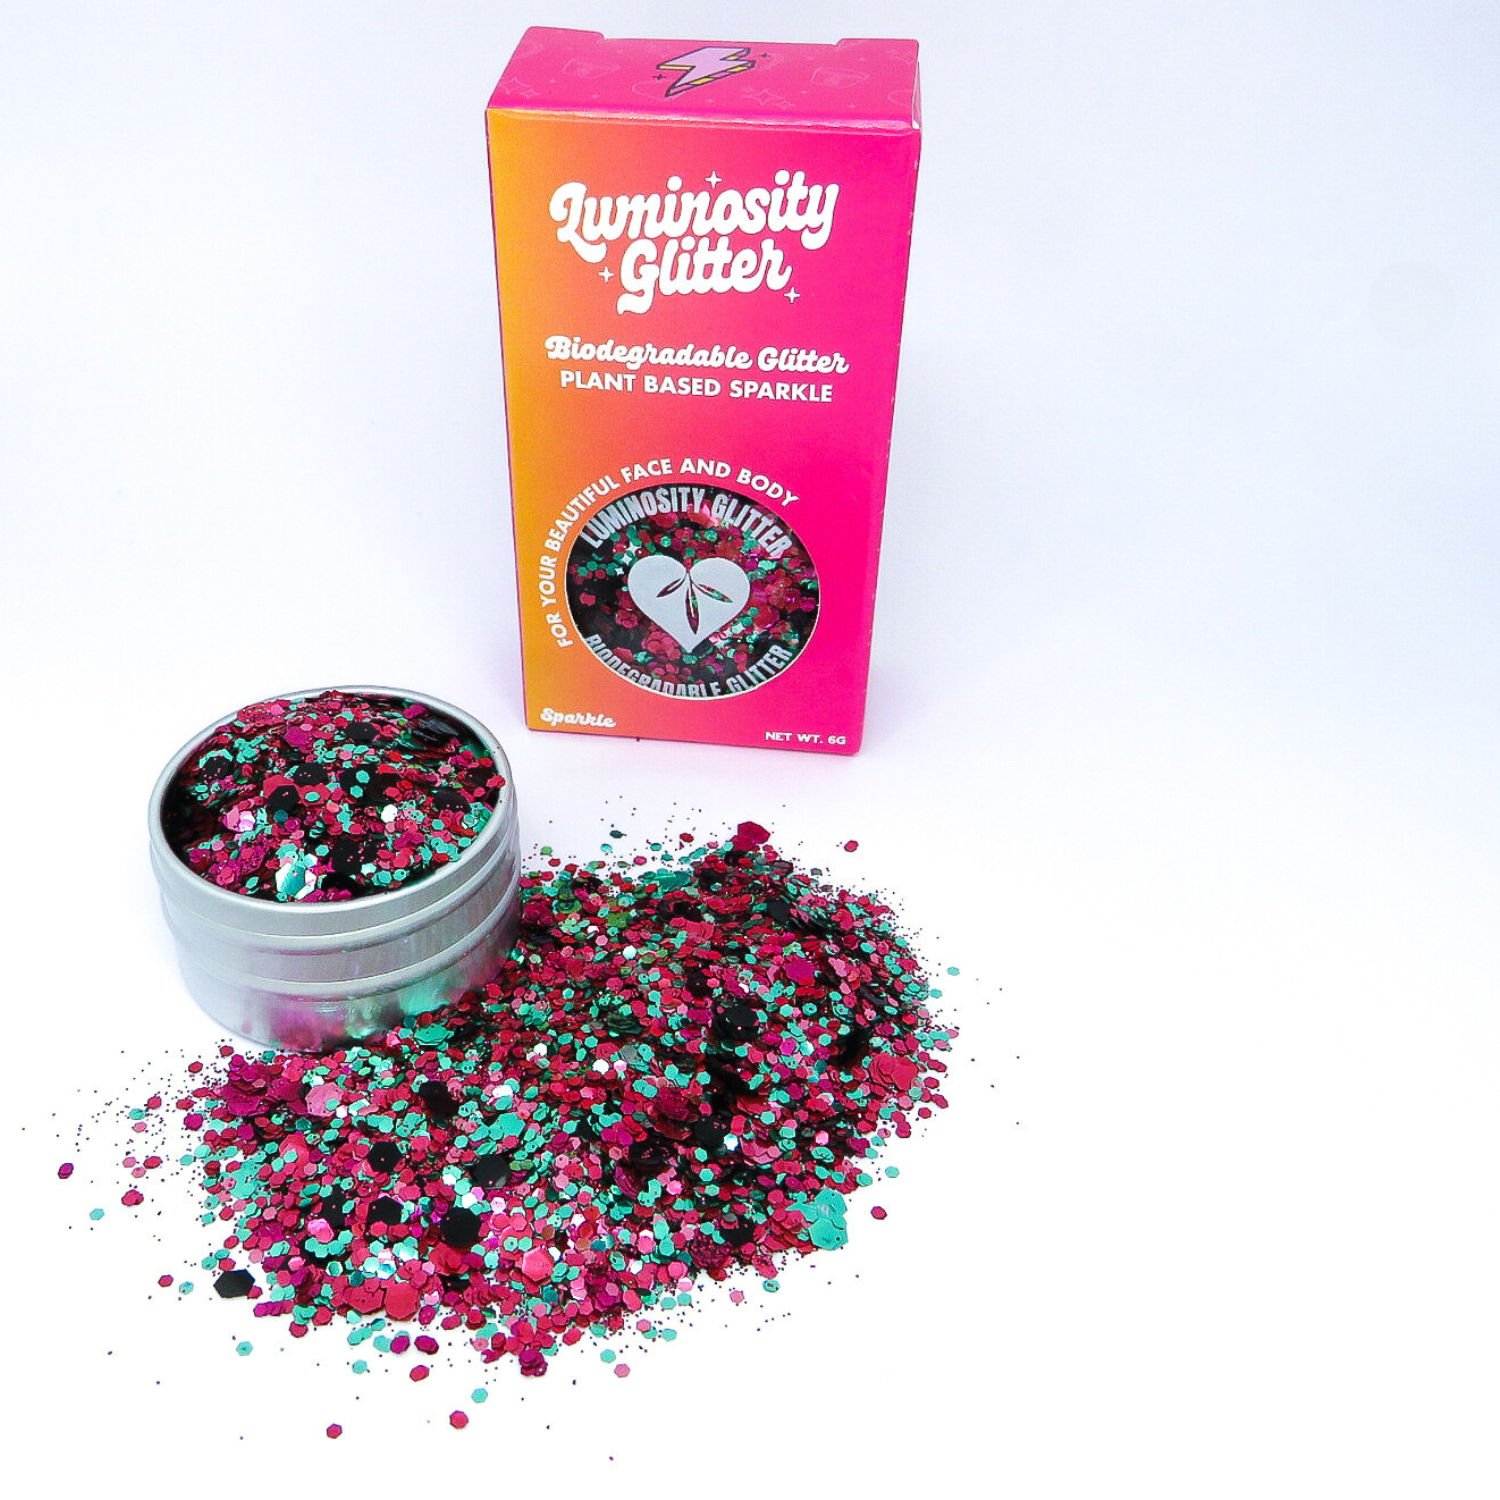 Watermelon face and body glitter made from eucalyptus cellulose